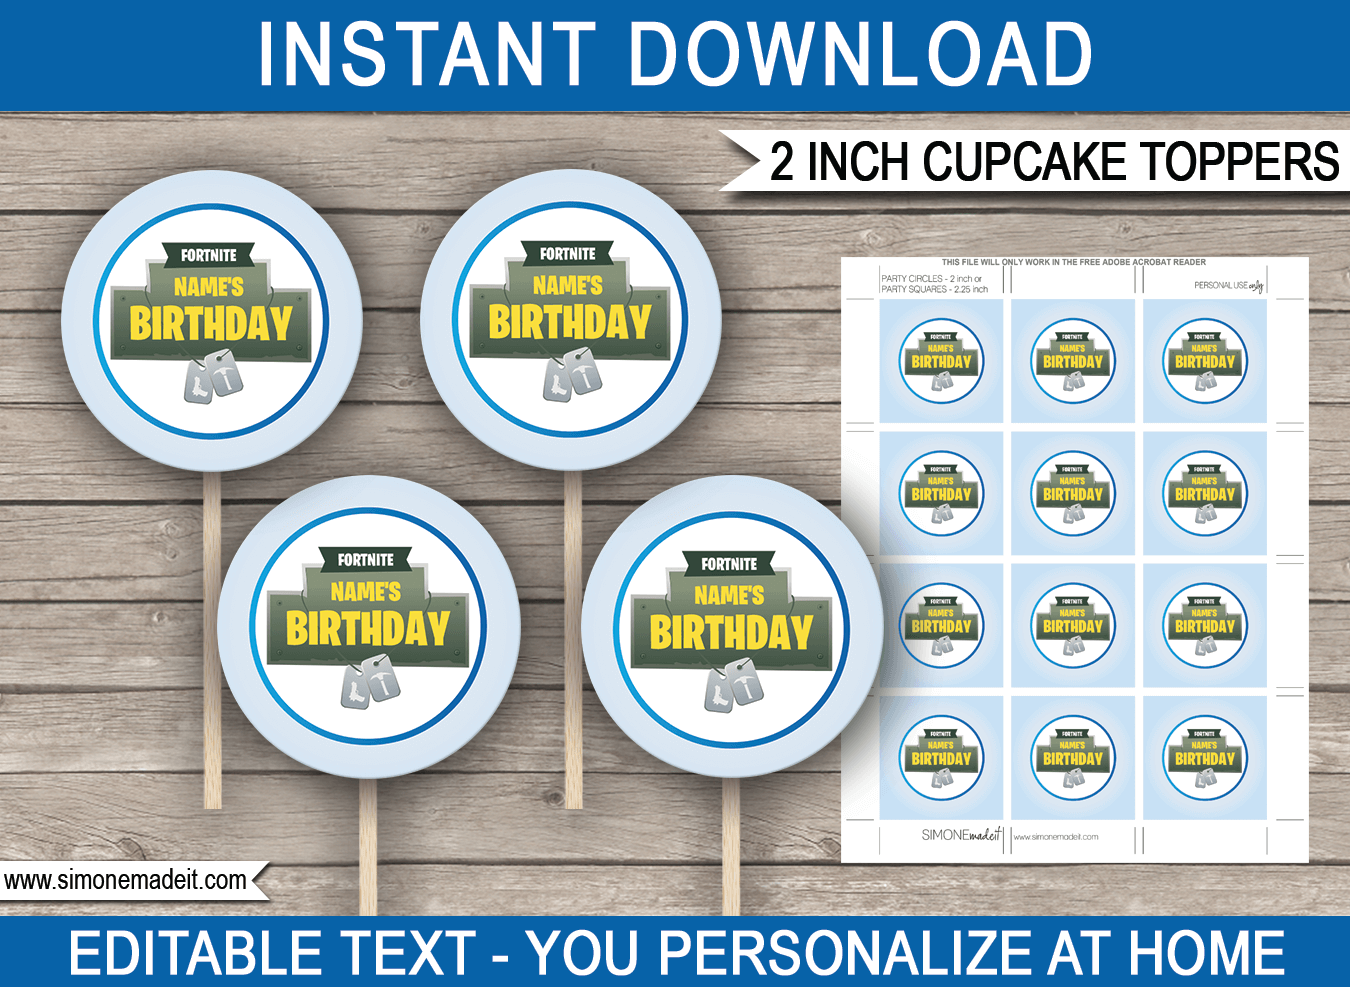 printable fortnite cupcake toppers fortnite birthday party decorations battle royale 2 inch - fortnite birthday invitations free download